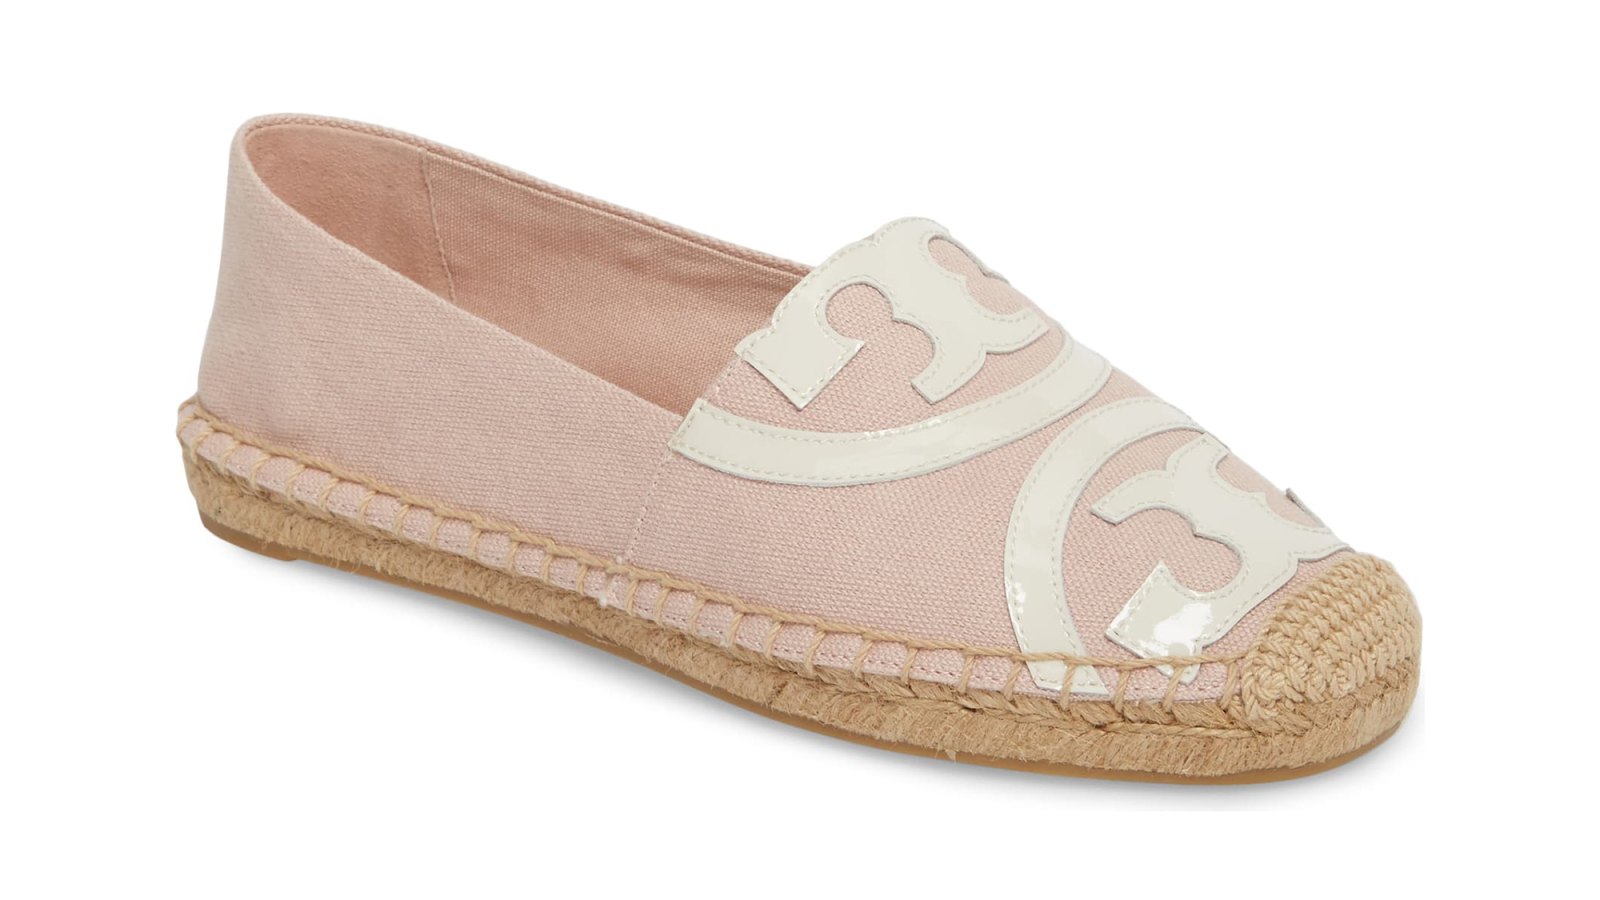 You Can Now Save Over $50 on the Absolute Cutest Tory Burch Flats